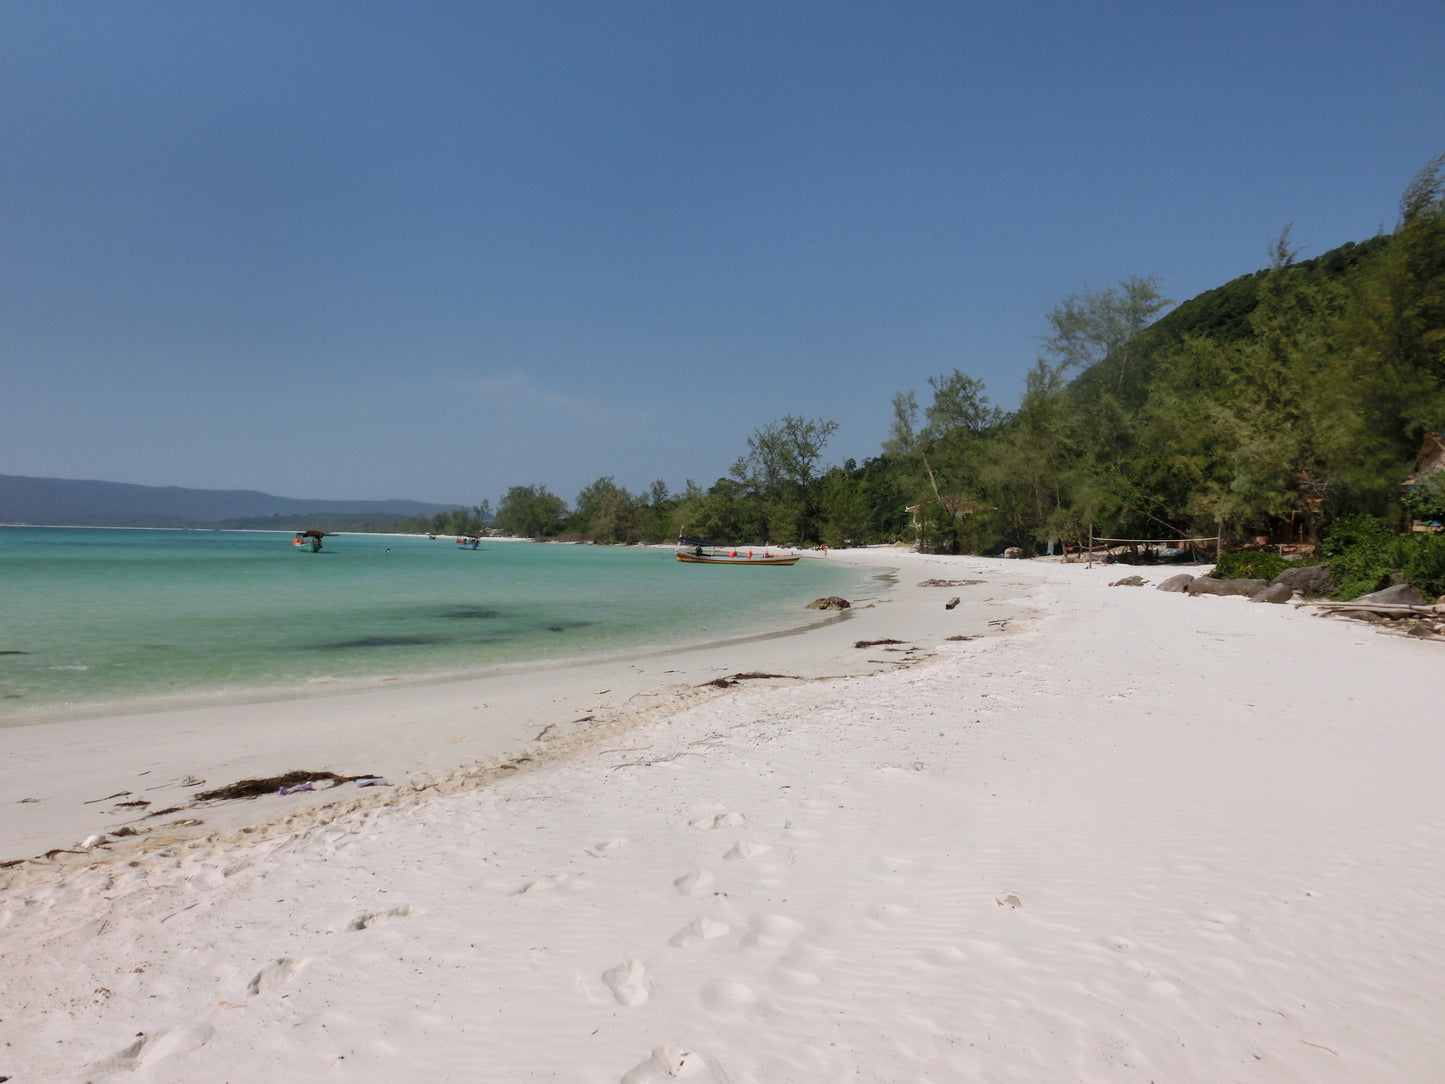 A6C: (3 Days) Koh Rong Island, Cambodia: A Tropical Paradise Adventure